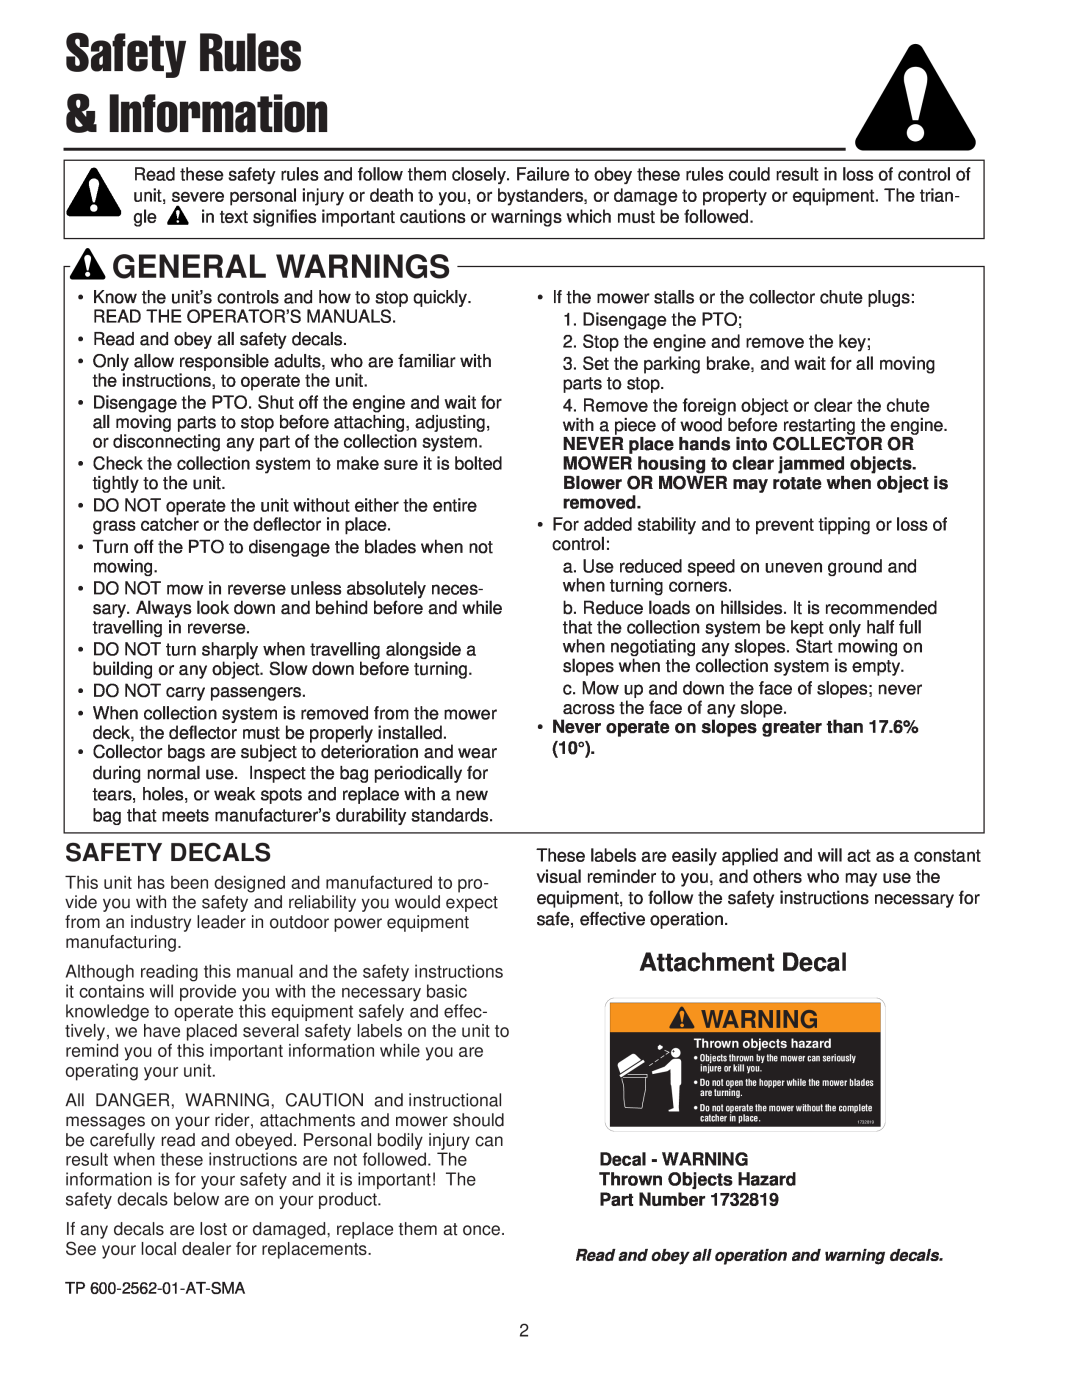 Snapper 1695169, 1733866 manual Safety Rules Information, Safety Decals, Attachment Decal, General Warnings 